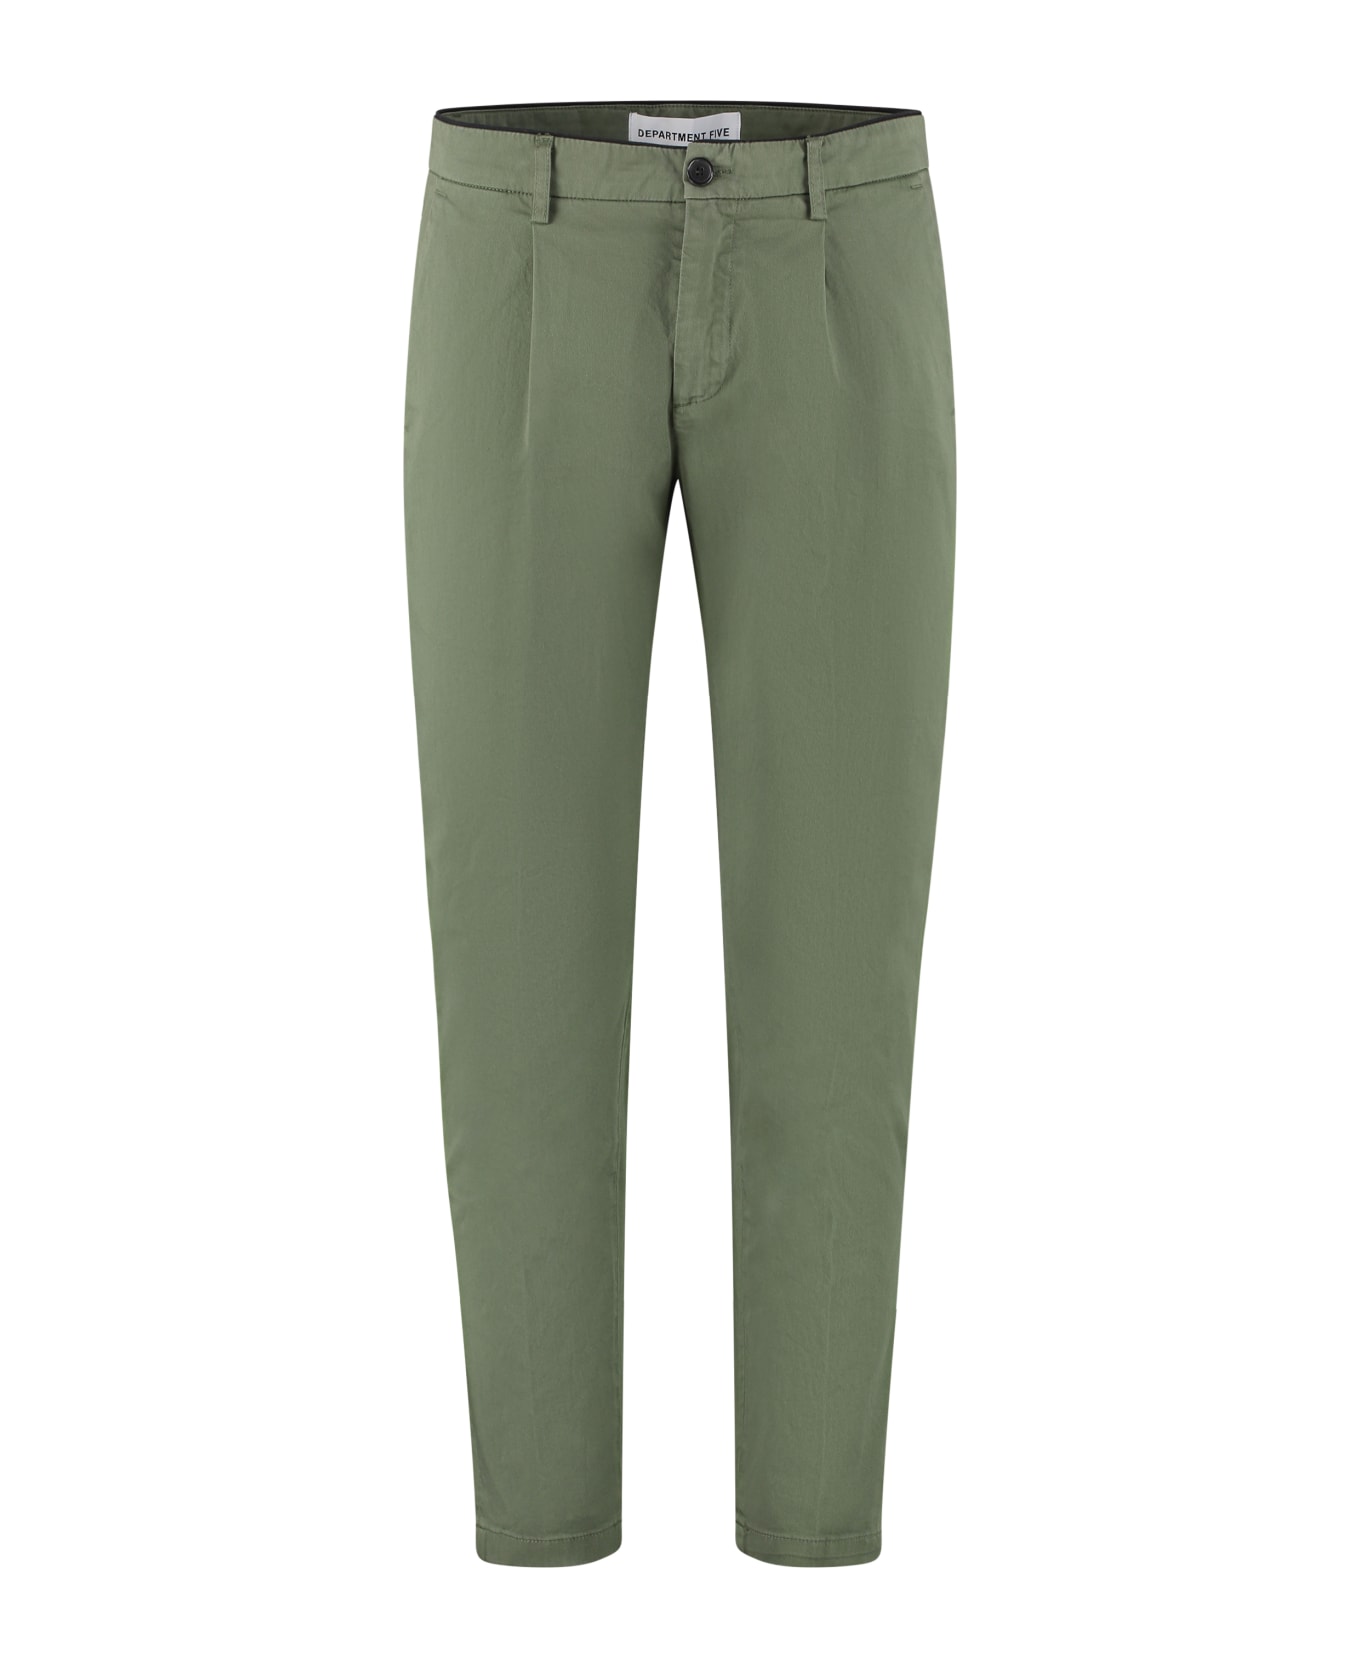 Department Five Prince Chino Pants - green